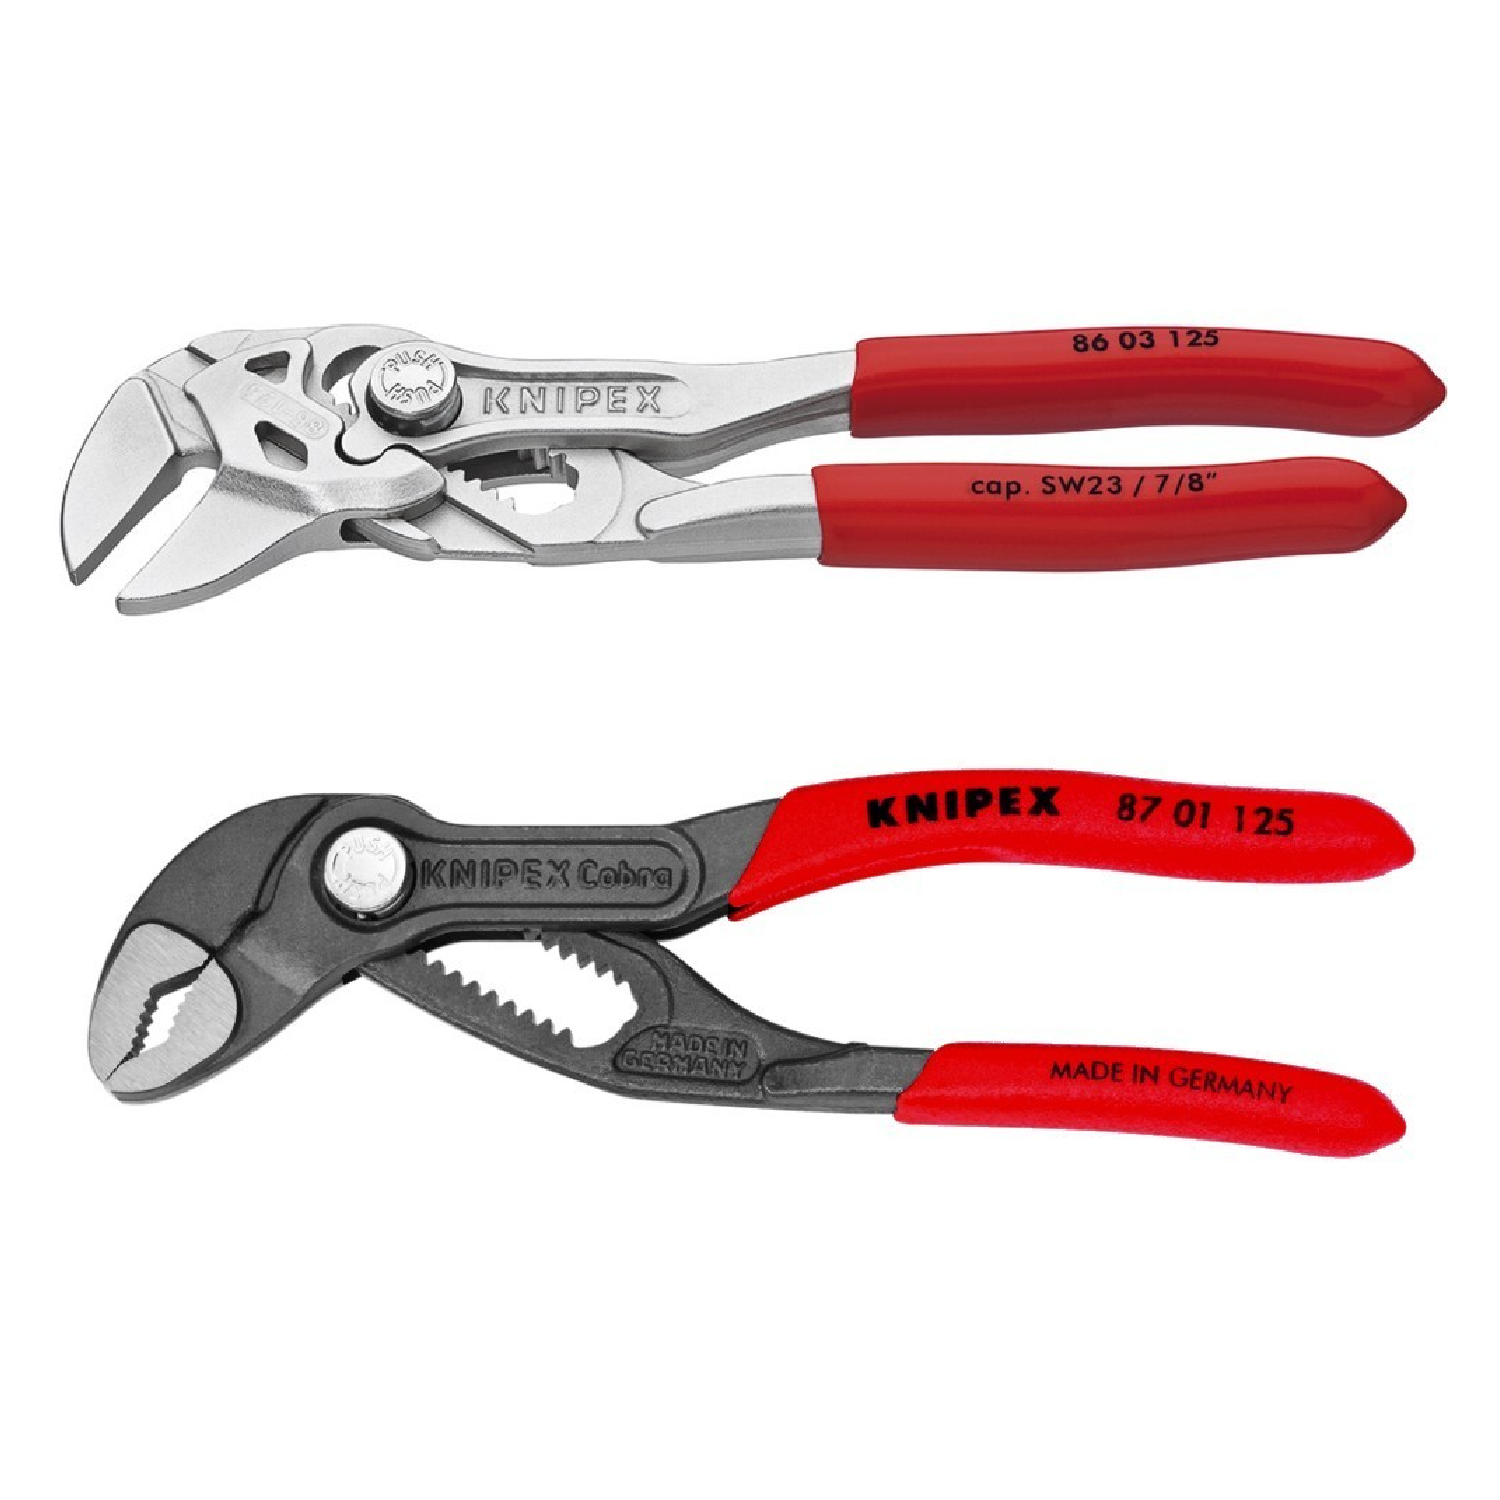 Knipex кобра. Knipex 8701125. Knipex Cobra 125. Книпекс8603125. Knipex Pliers Wrench.